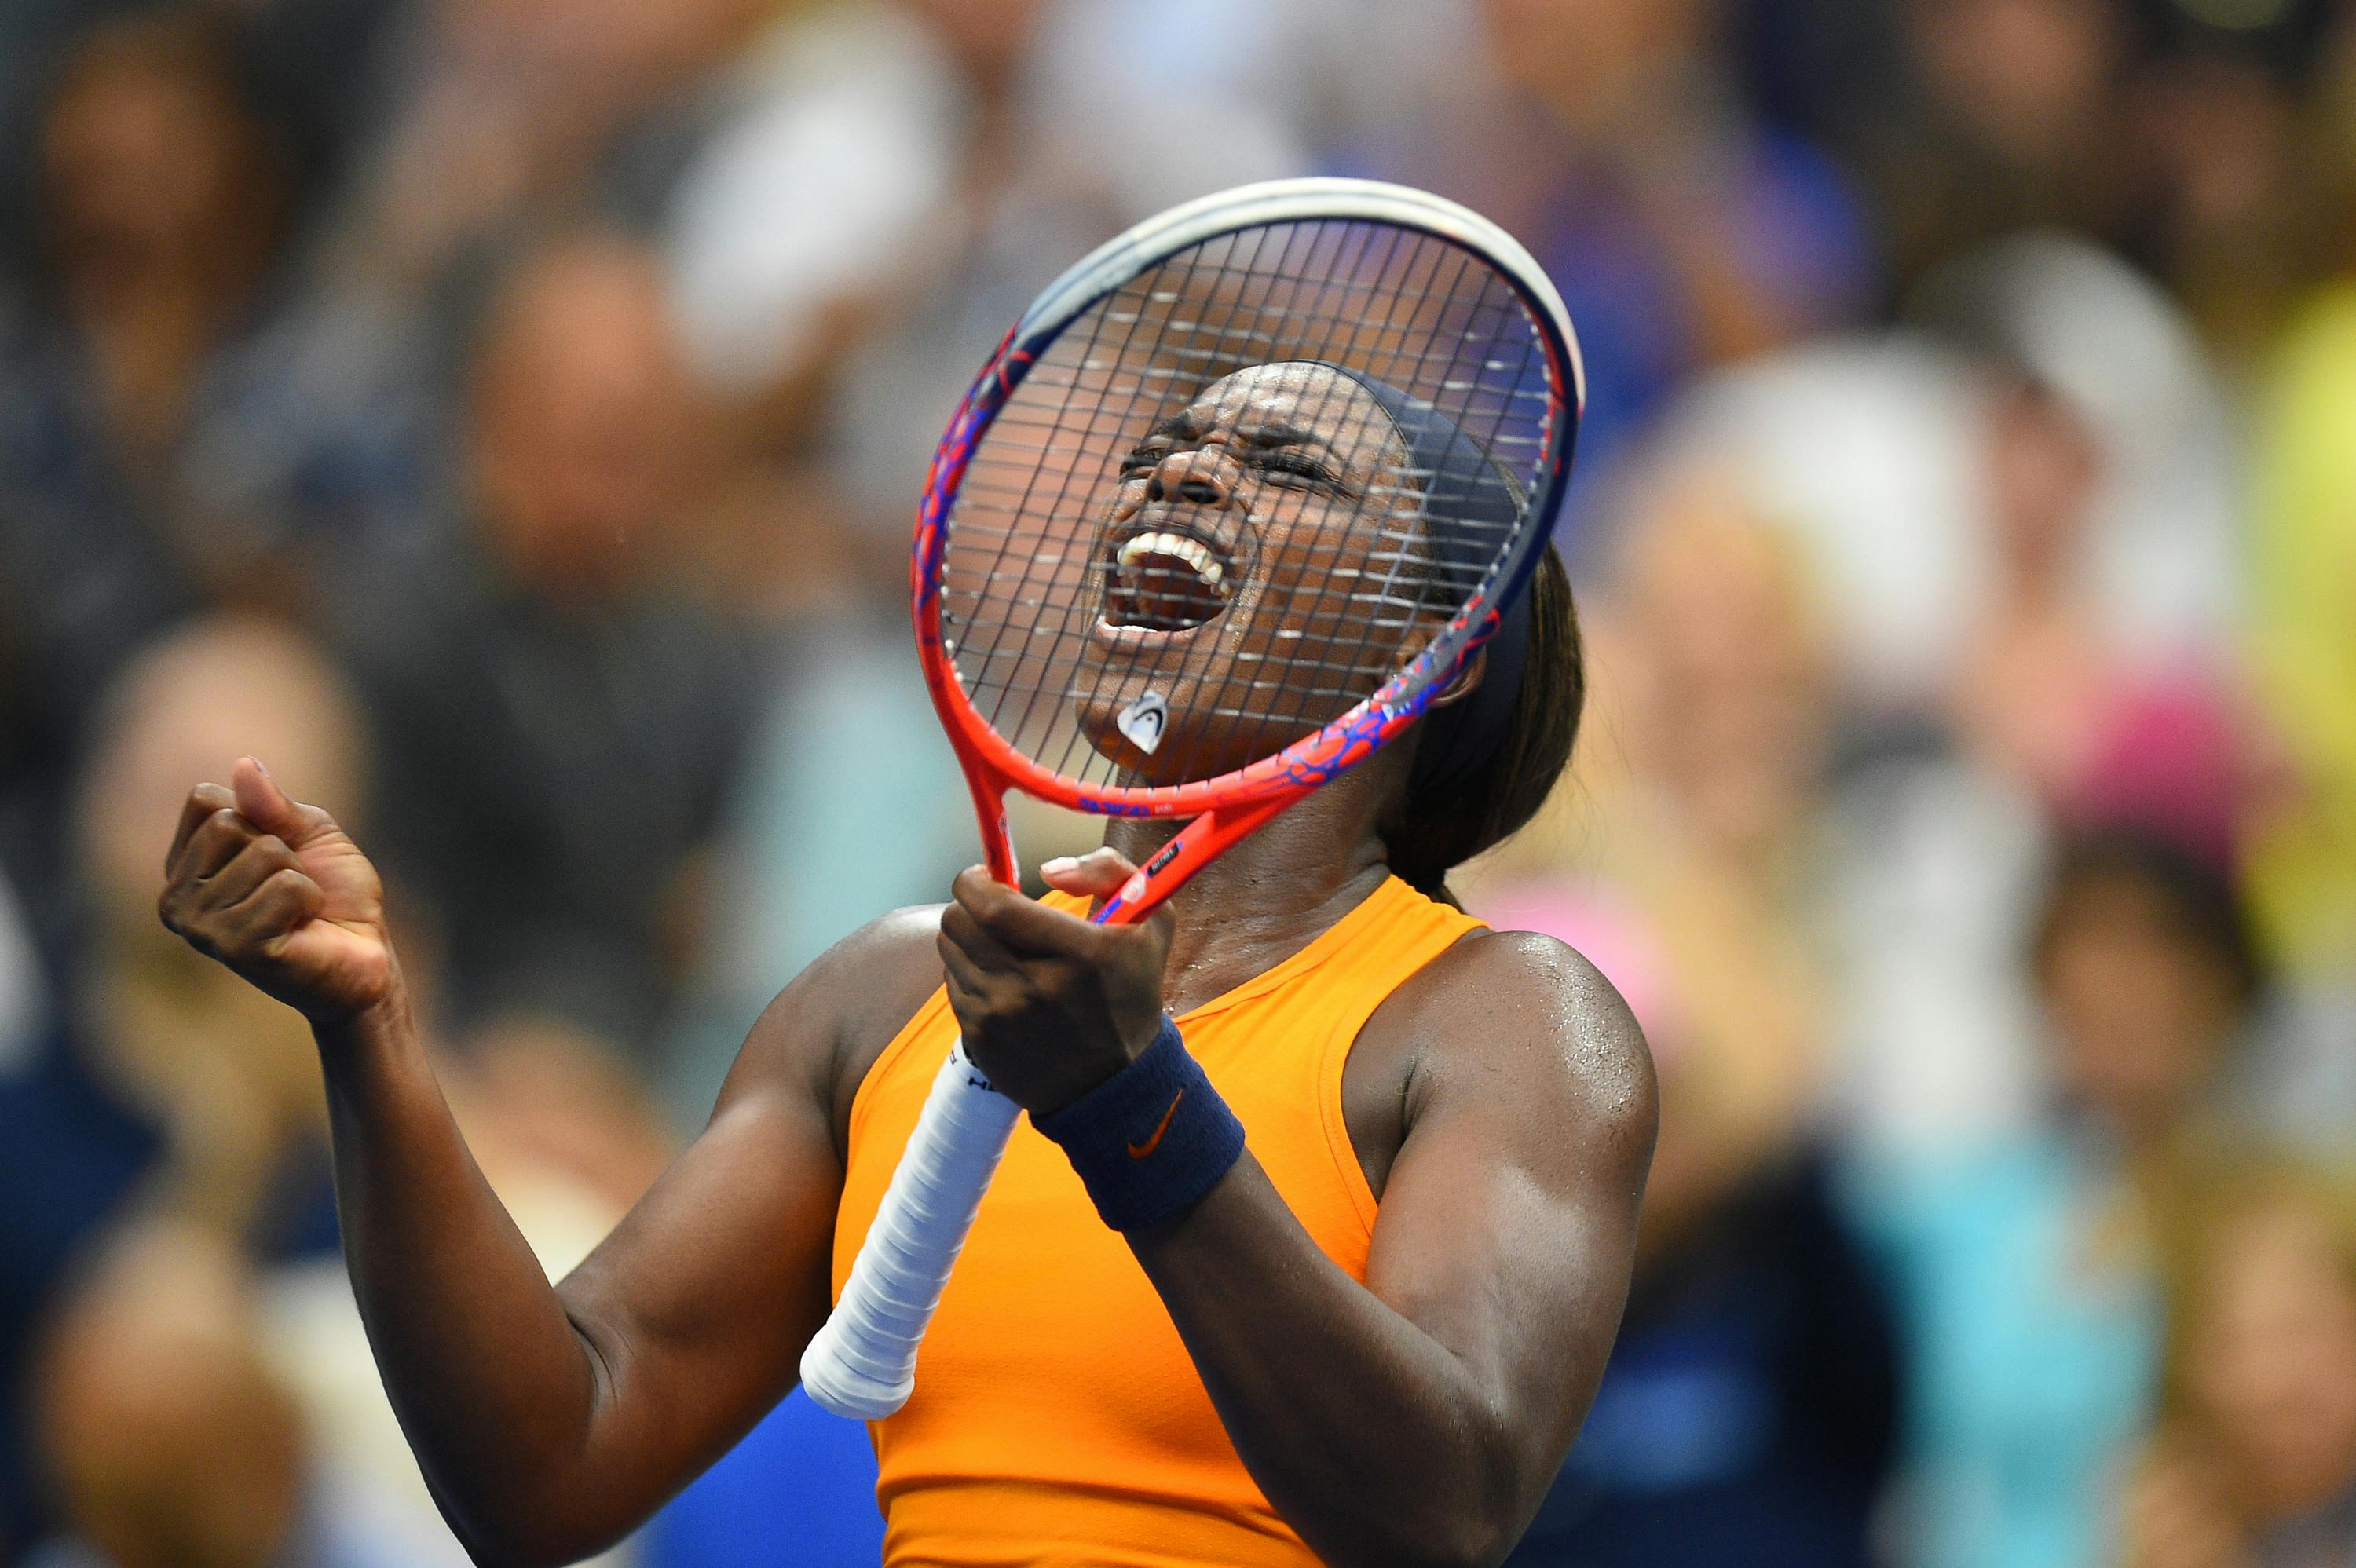  Sloane Stephens shouting during the 2018 US Open